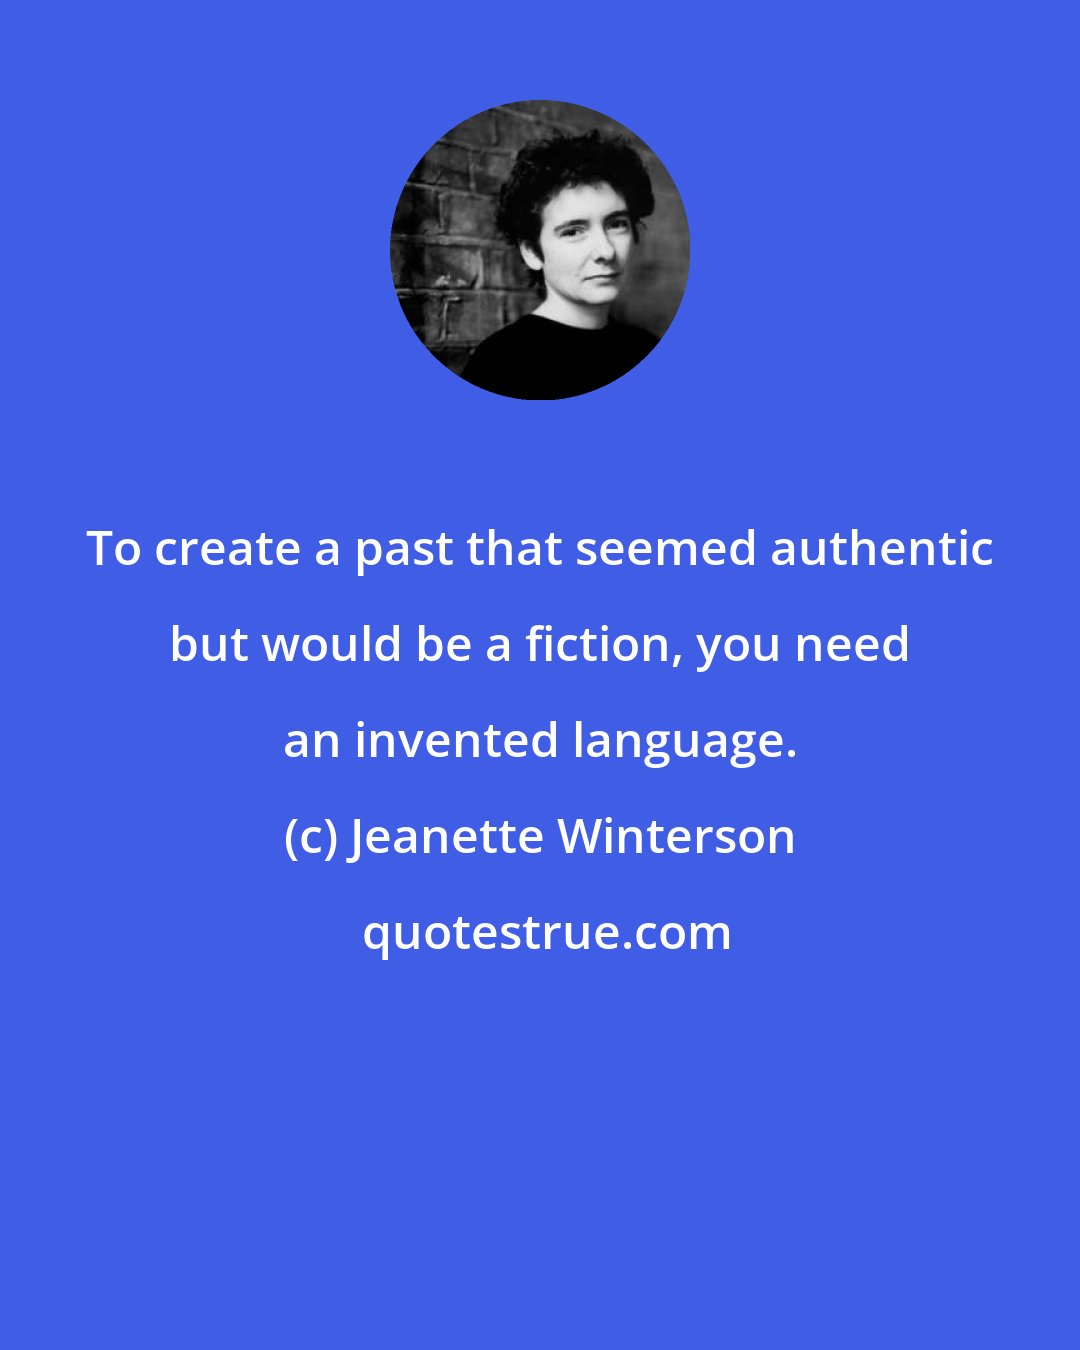 Jeanette Winterson: To create a past that seemed authentic but would be a fiction, you need an invented language.